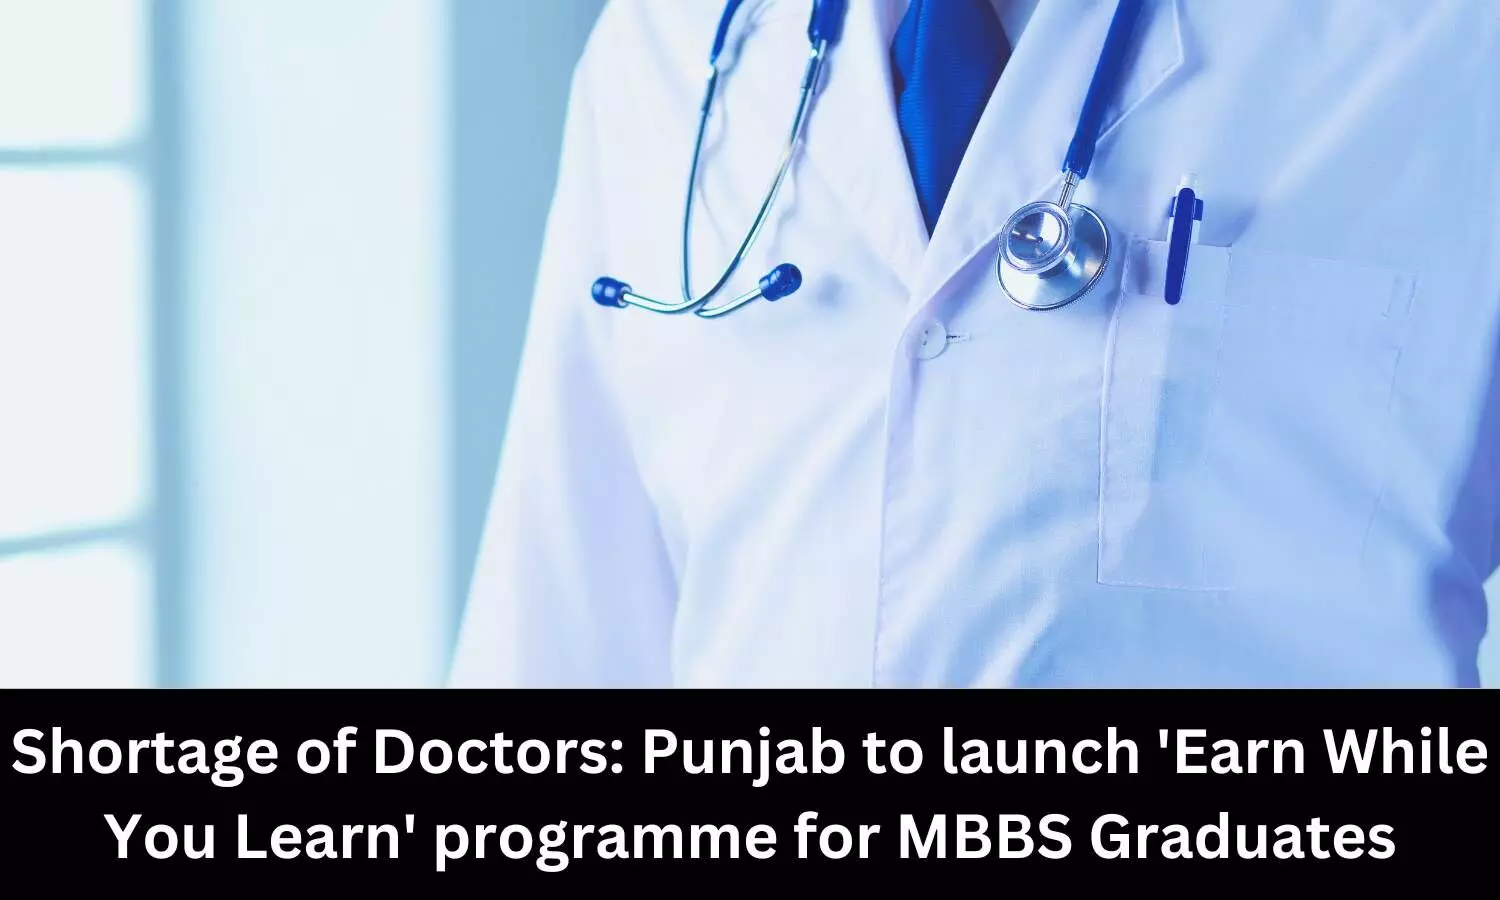 Doctor shortage in Punjab: State Govt plans to launch Earn While You Learn Programme for MBBS graduates